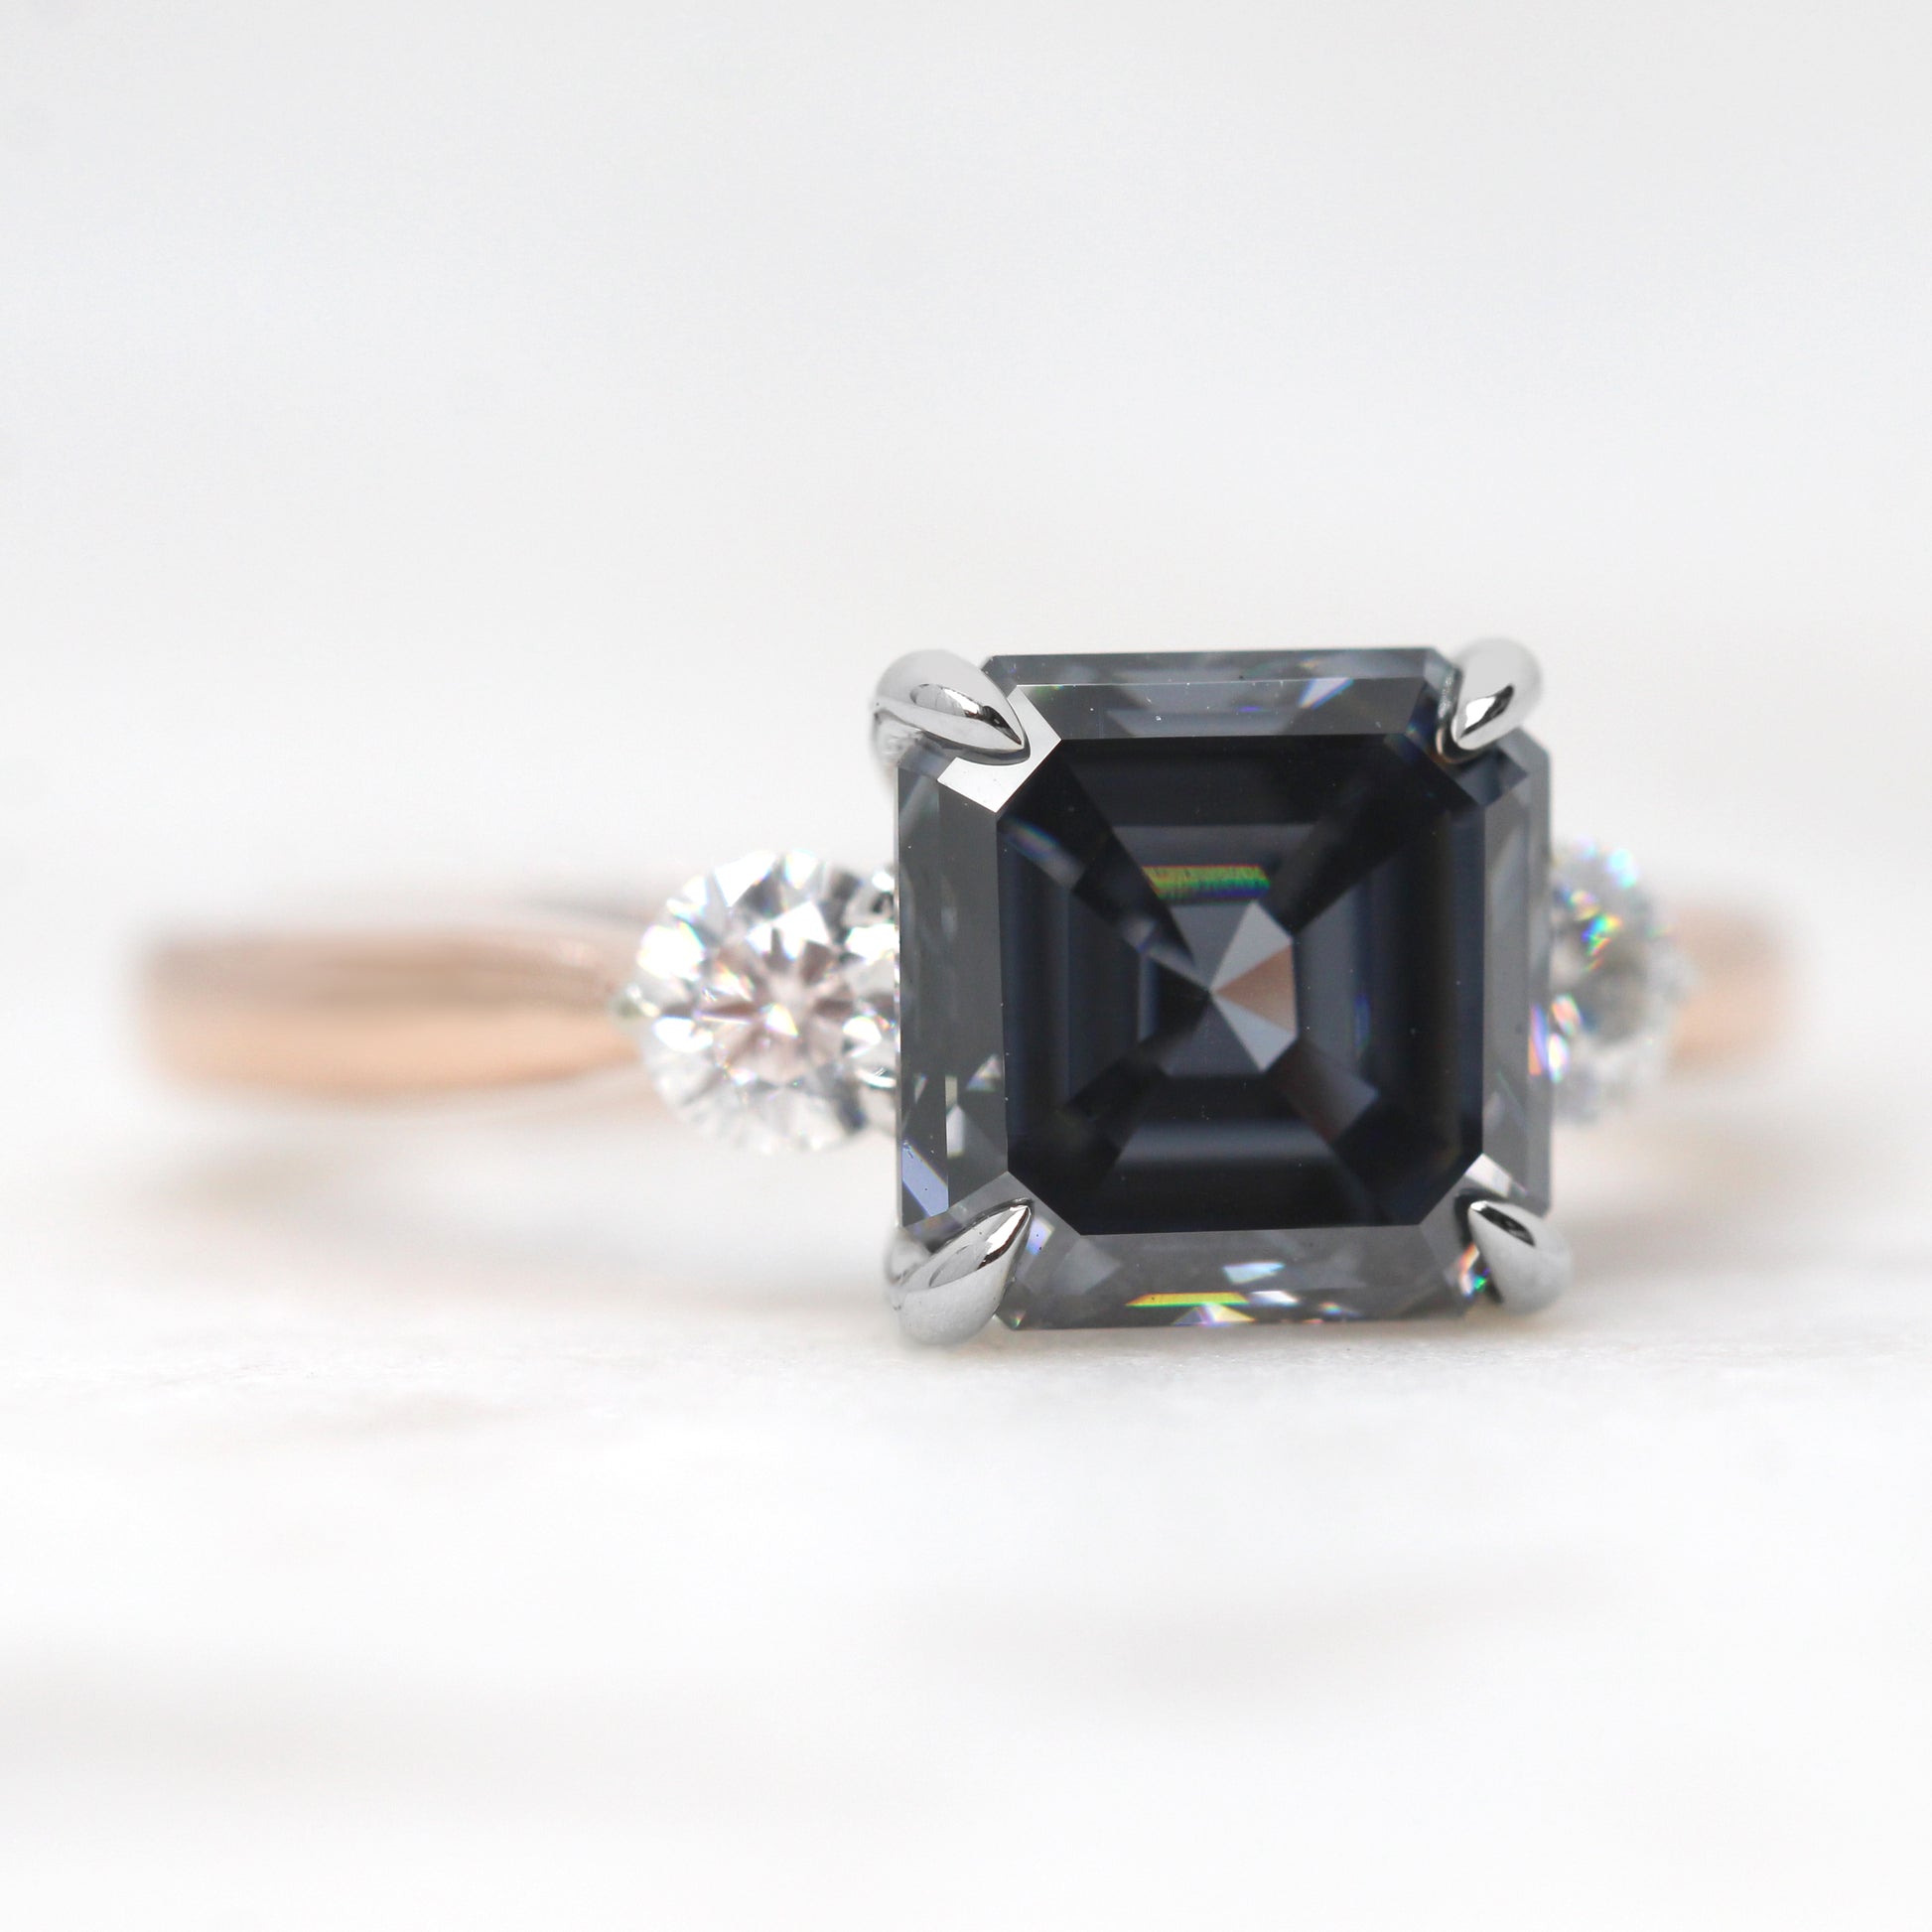 Olive Ring with a 2.50 Carat Asscher Cut Gray Moissanite and Moissanite Accents in 14k White & Rose Gold - Ready to Size and Ship - Midwinter Co. Alternative Bridal Rings and Modern Fine Jewelry